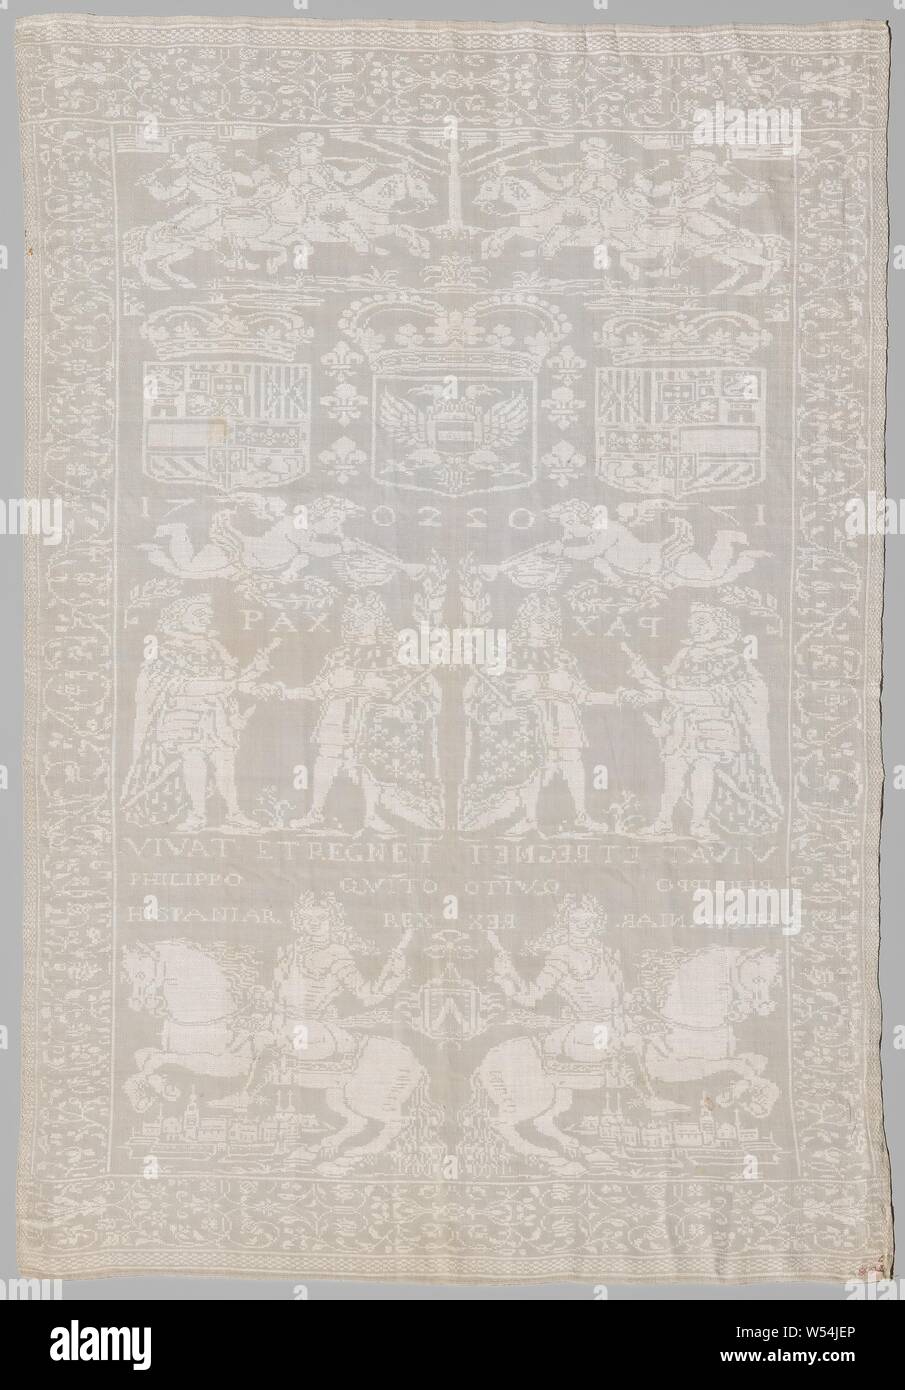 Napkin with Philip V, pretender for the Spanish throne, Napkin of linen damask with Philip V, contested pretender for the Spanish throne. Midfield: The symmetrical doubled pattern shows four scenes from bottom to top: 1 Rider with command staff, high allone wig. The averted horse prances and leaves a clear view of a city with towers on which crosses. Caption: VIVAT ET REGNET PHILIPPO QUINTO HISPANIAR REX. On the center axis a coat of arms with twill: the city of Kortrijk. 2 The sun king with a royal mantle adorned with fleurs de lys reaches out to his grandson Philip. Intermediate script: PAX Stock Photo